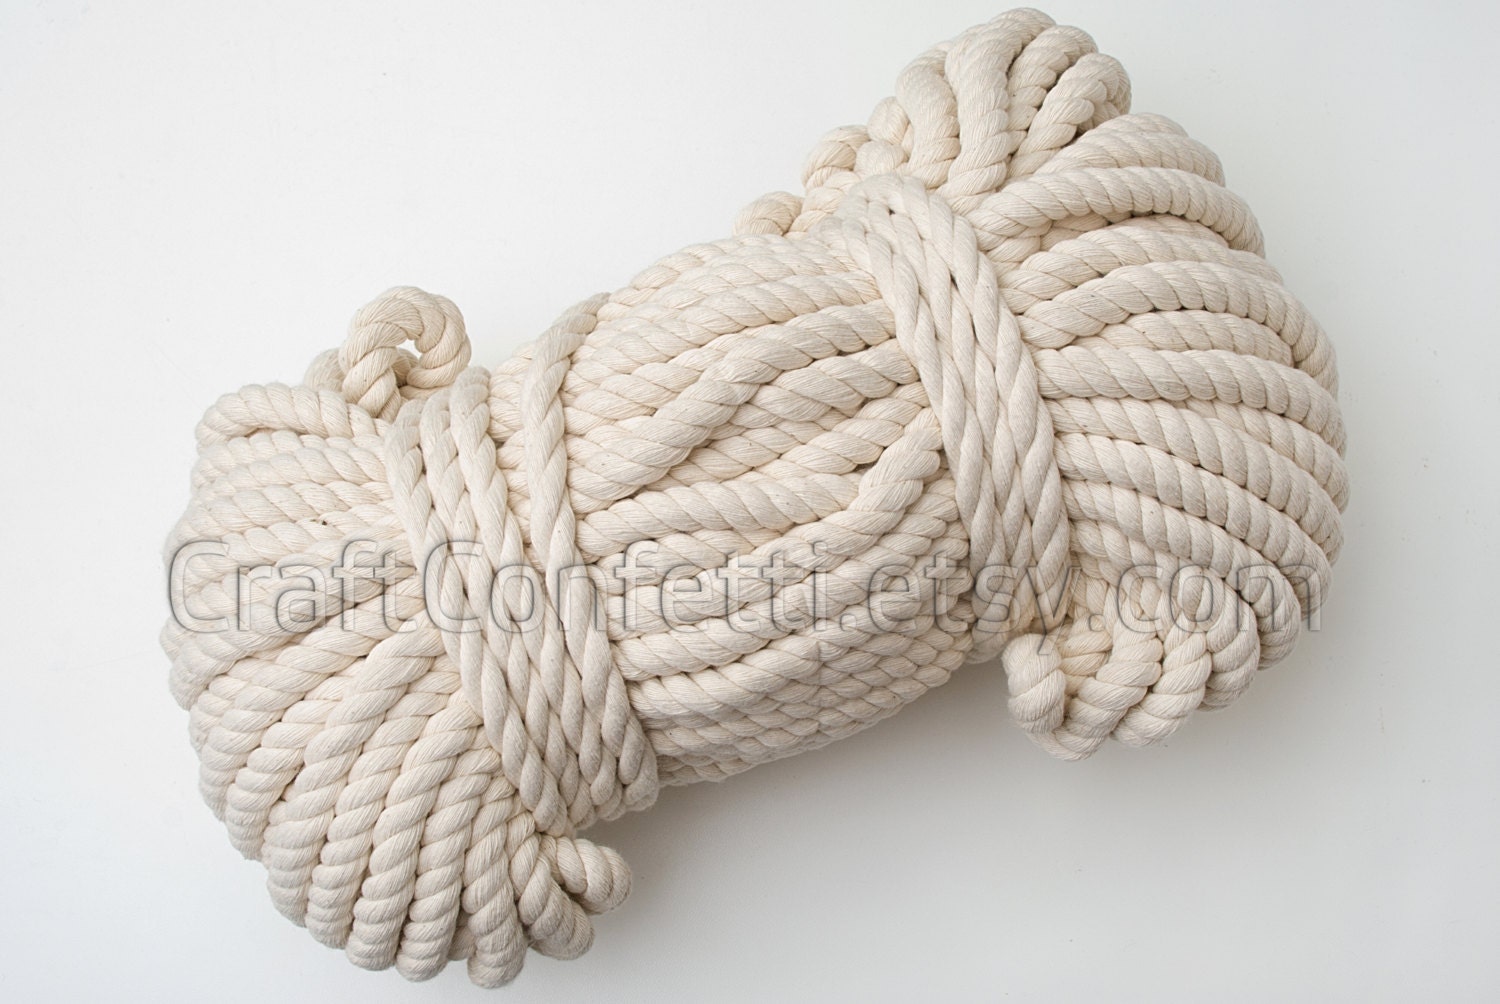 SINYLOO Natural Twisted Thick Cotton Rope - Brown Nautical Rope